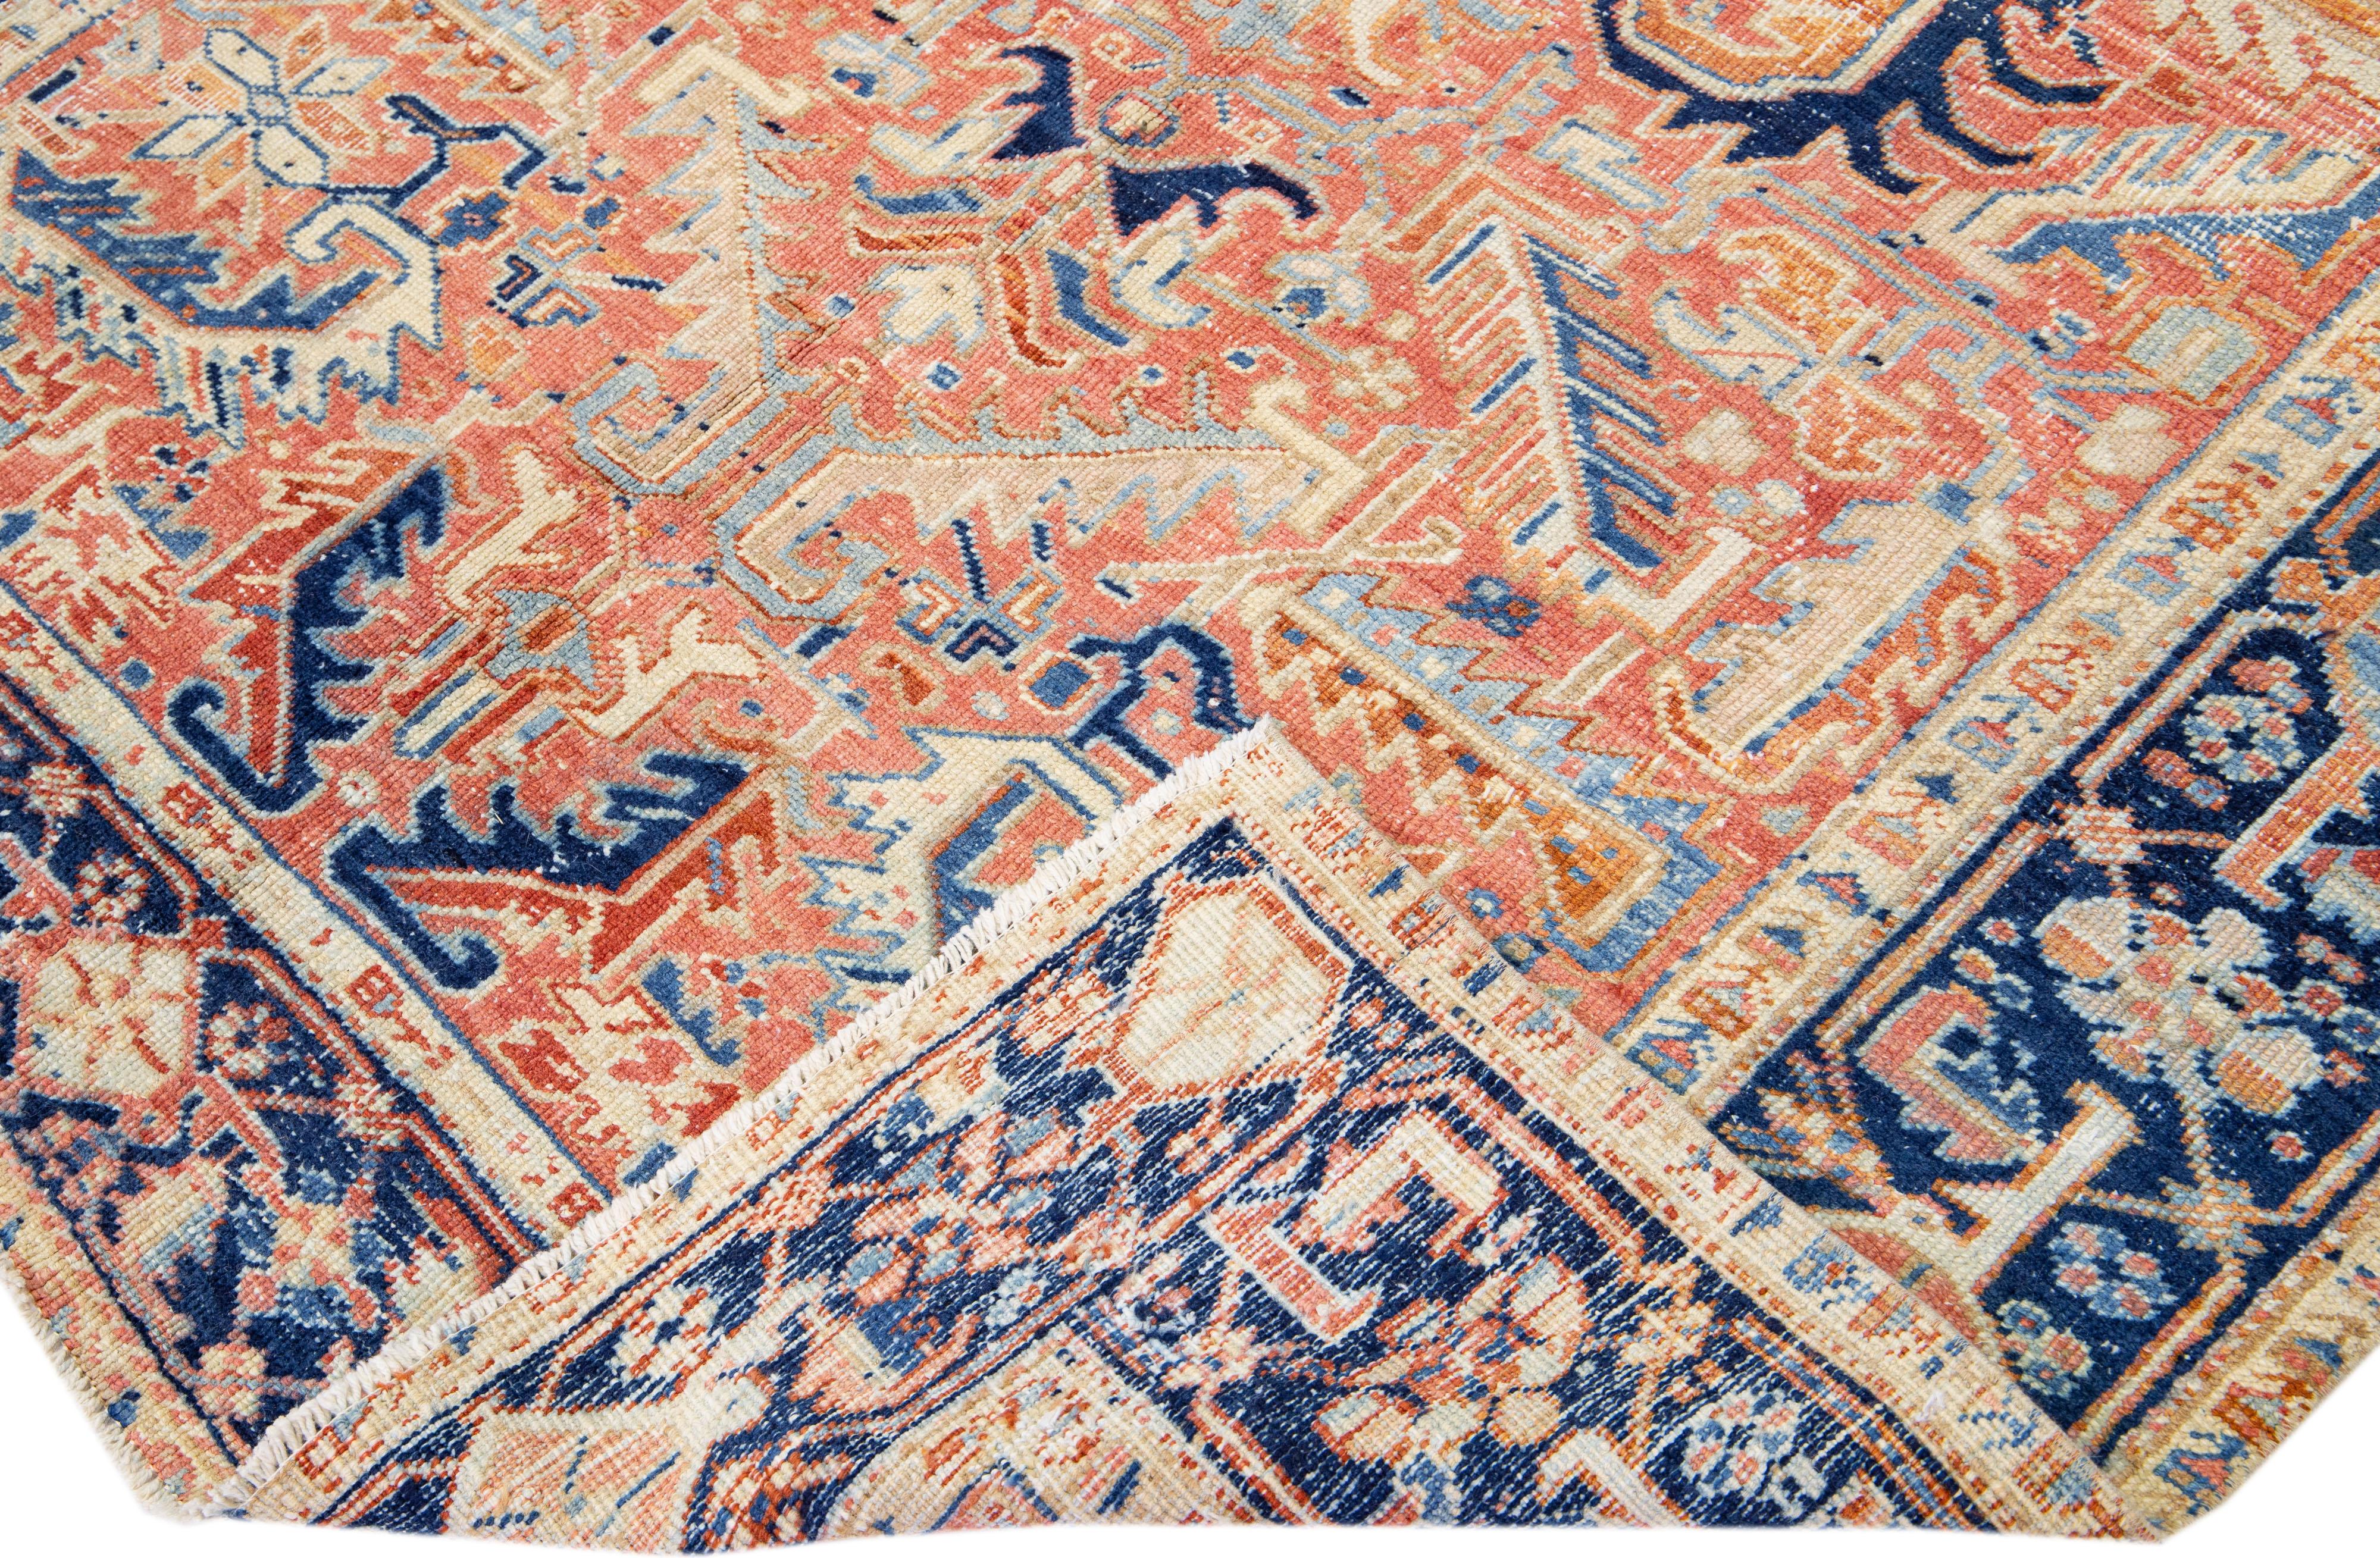 Beautiful antique Heriz hand-knotted wool rug with a rust color field. This Persian rug has a blue frame with orange and beige accents in a gorgeous all-over geometric floral design.

This rug measures: 6'8